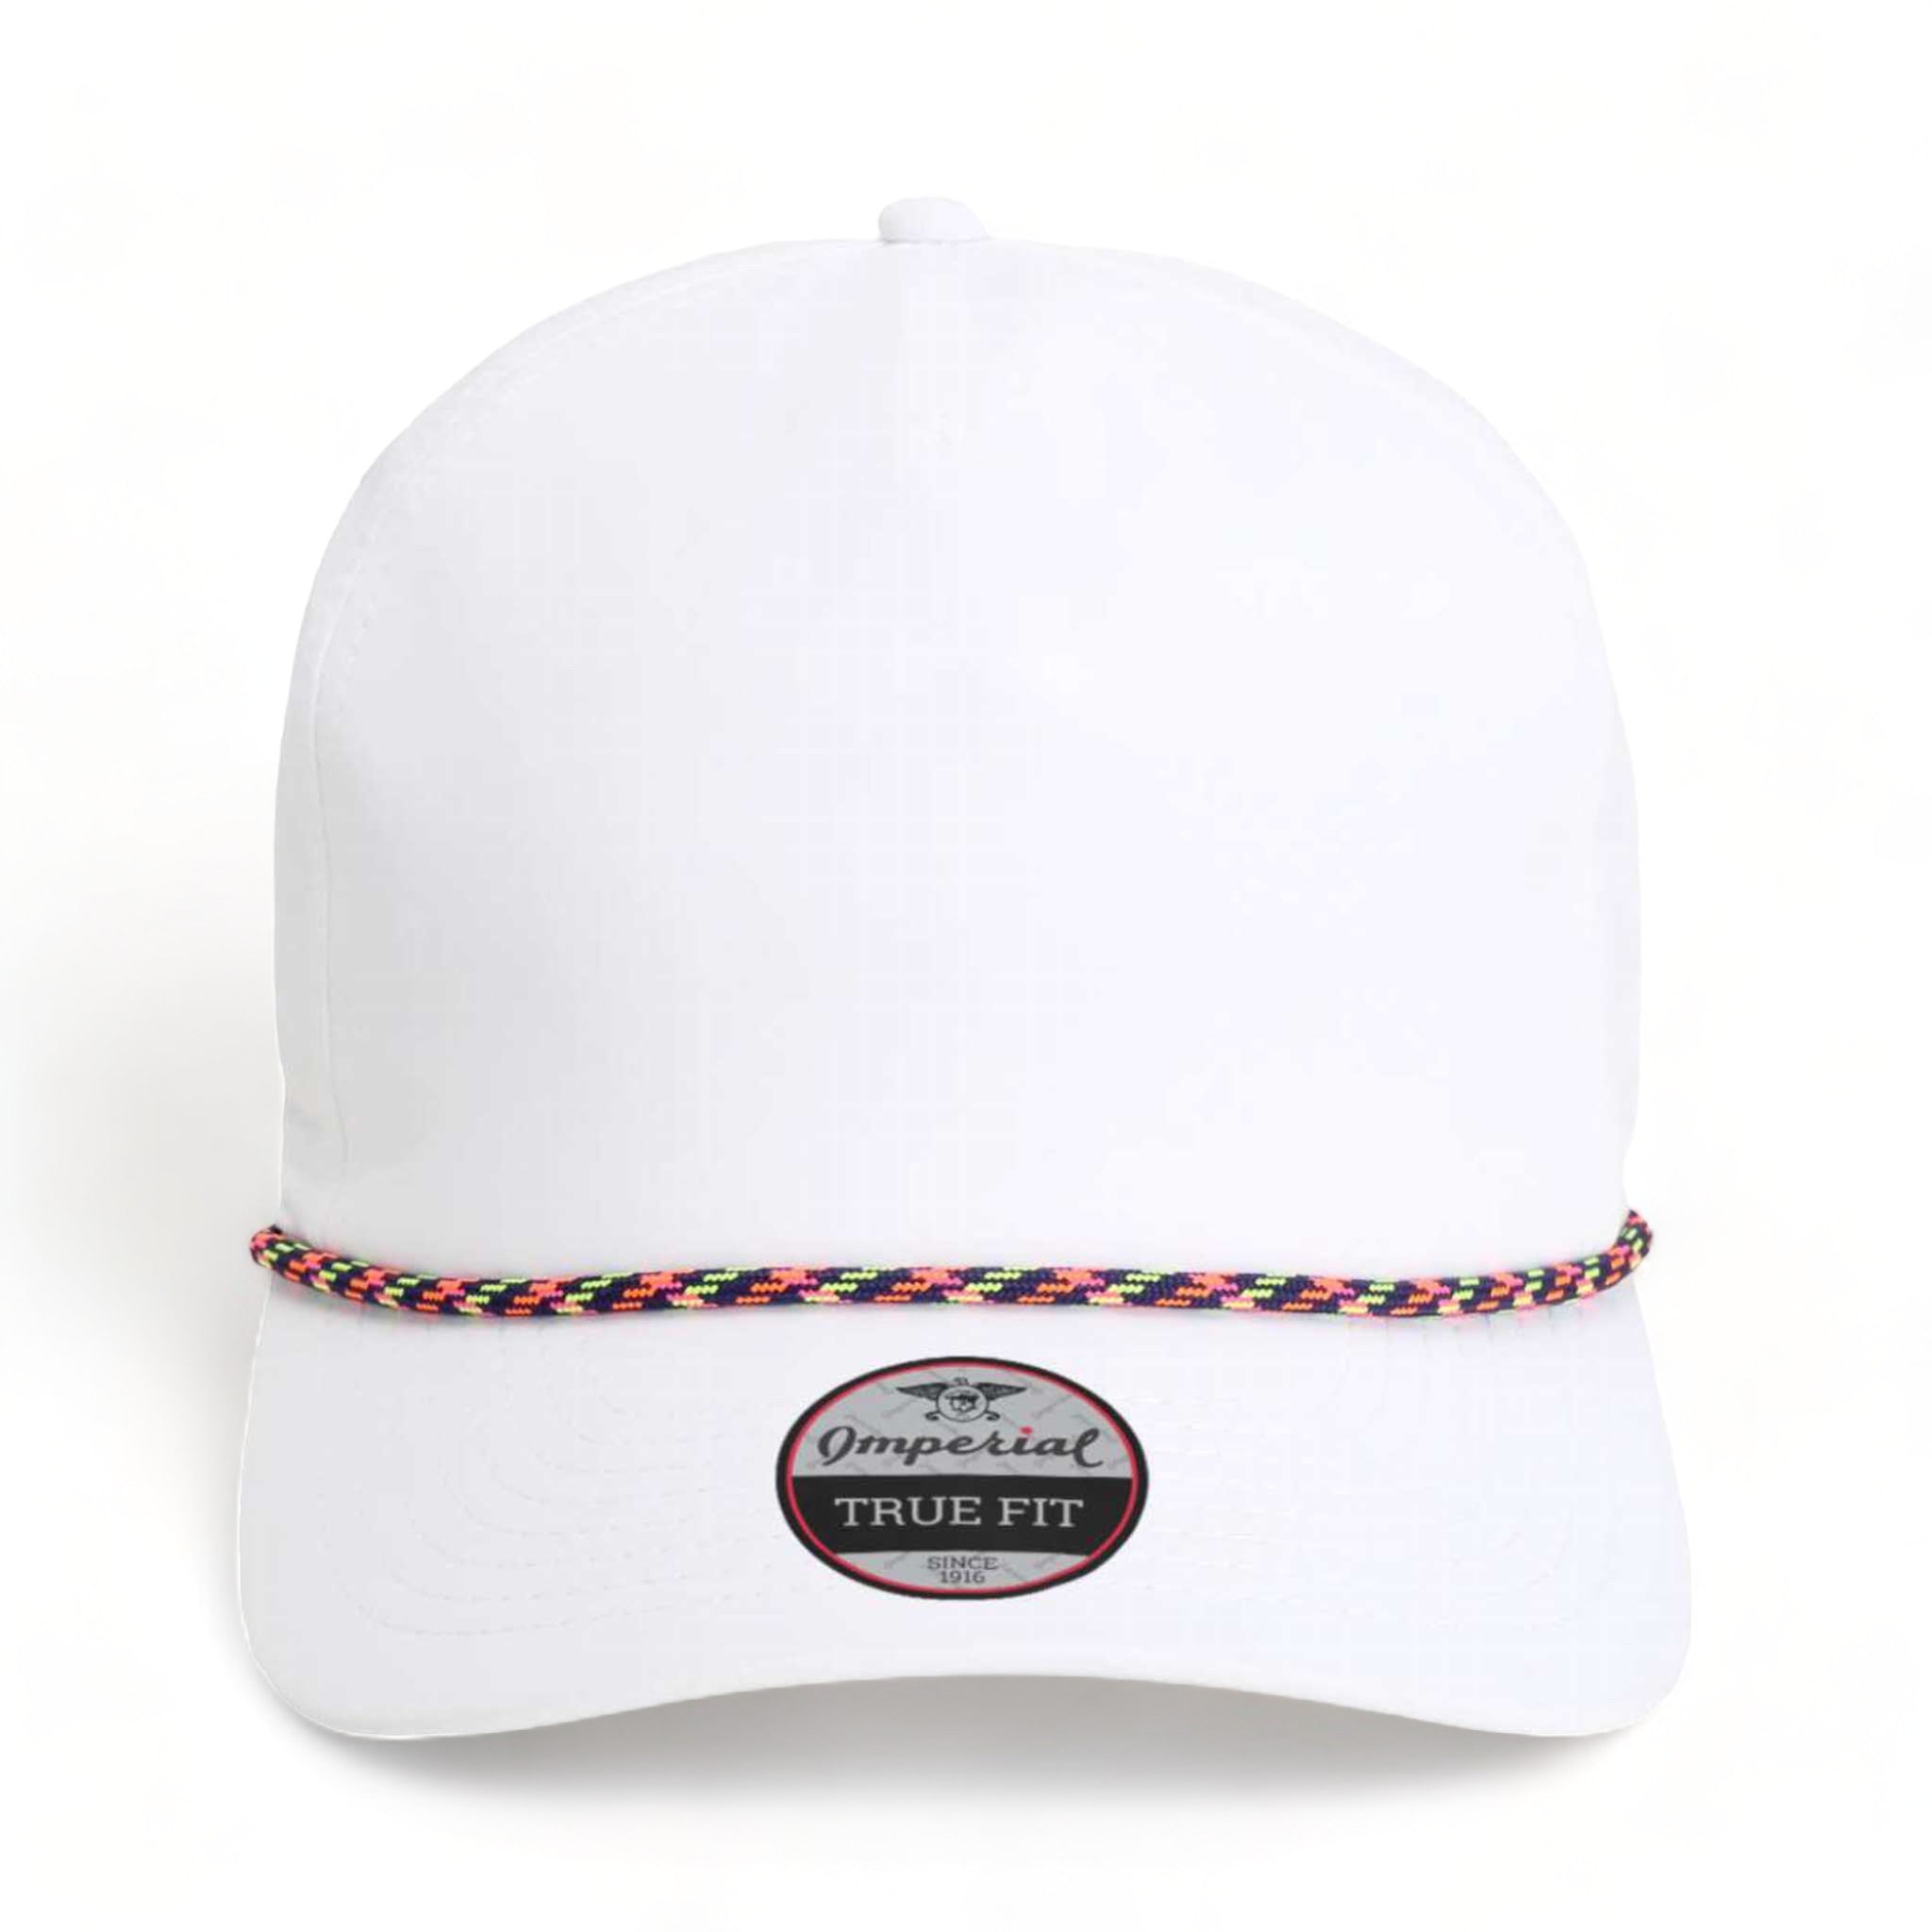 Front view of Imperial 5054 custom hat in white, navy and neon